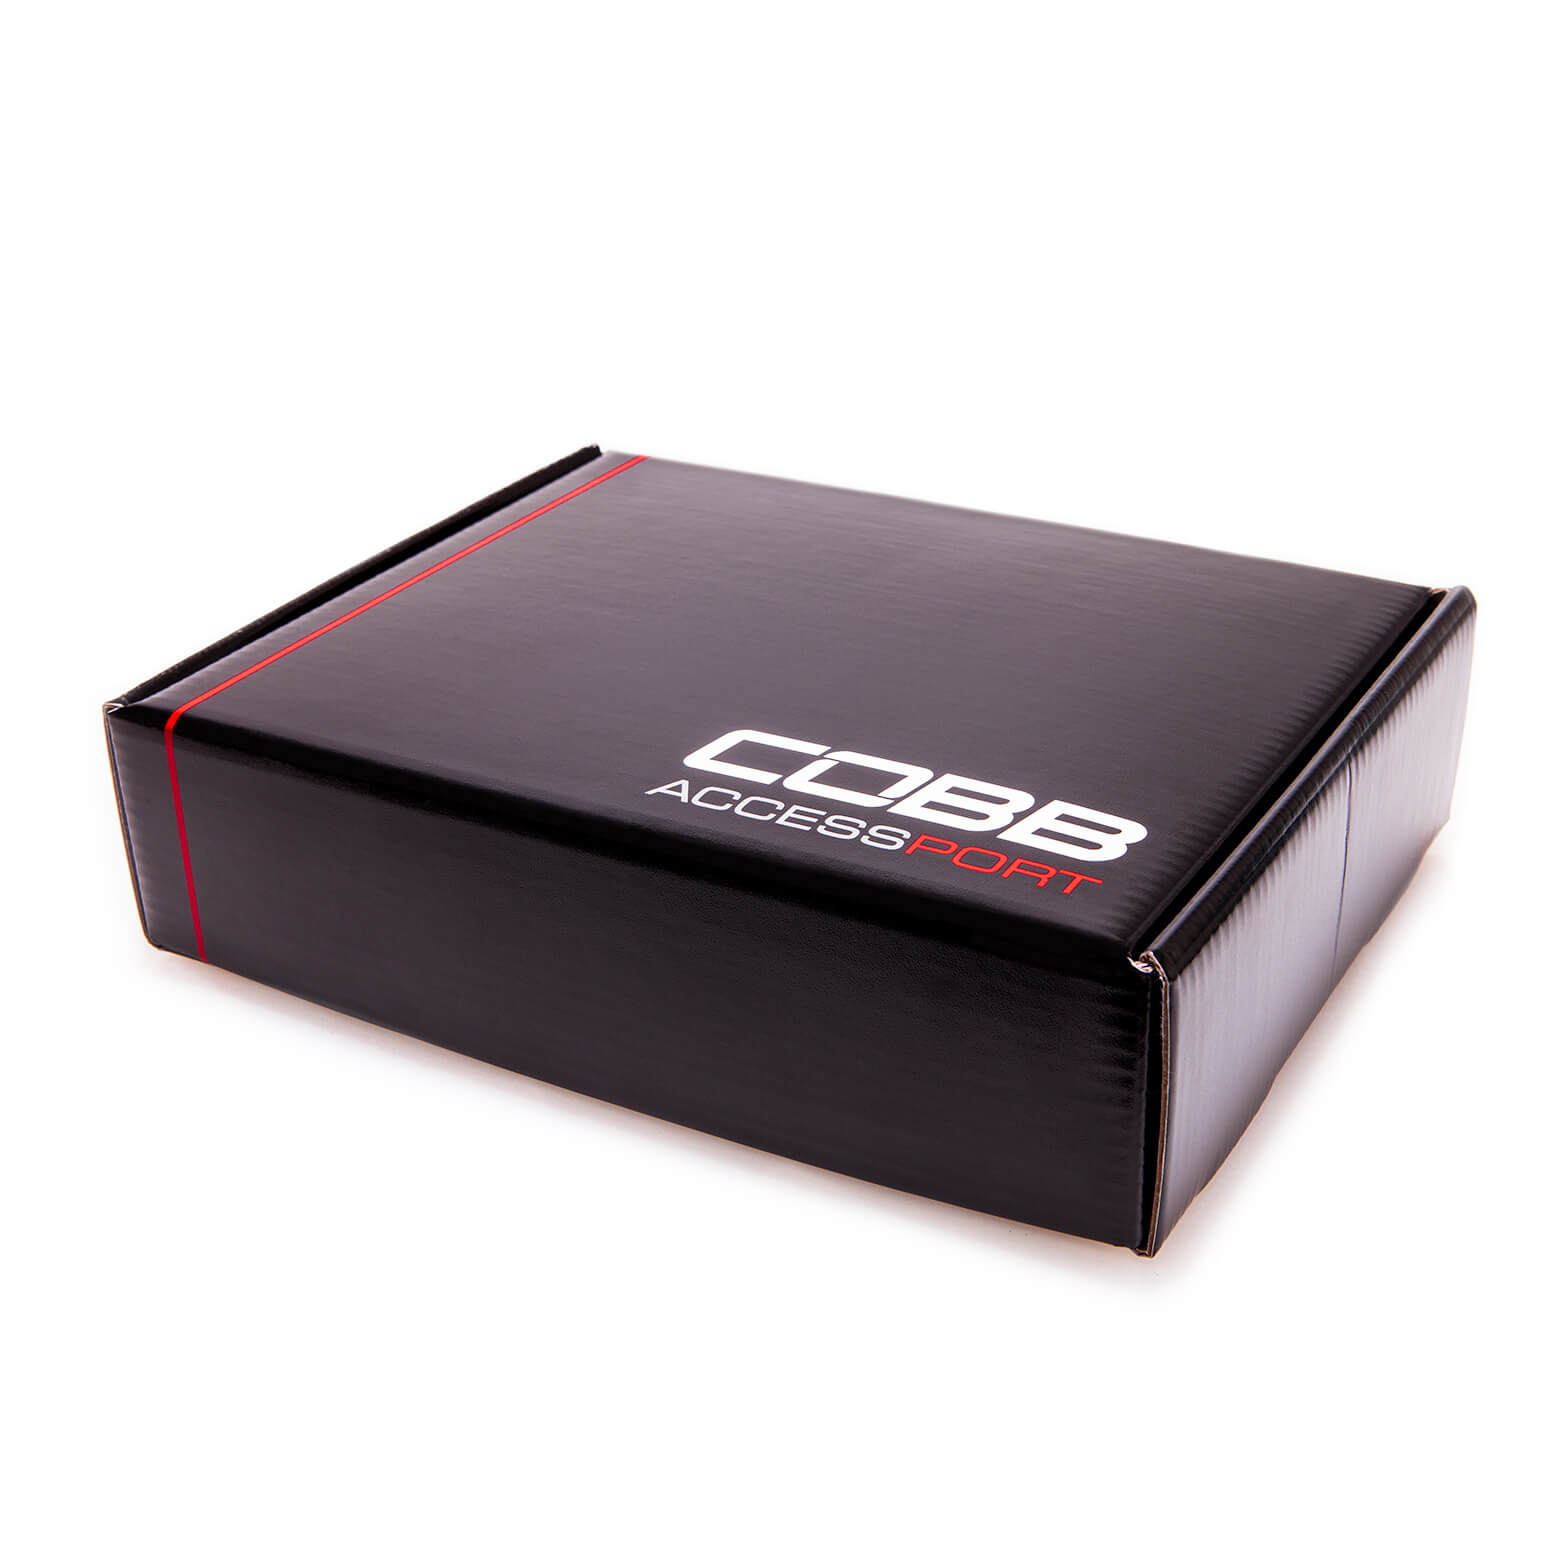 COBB AP3-FRP-001 Accessport for FORD Performance EcoBoost ECU Photo-2 